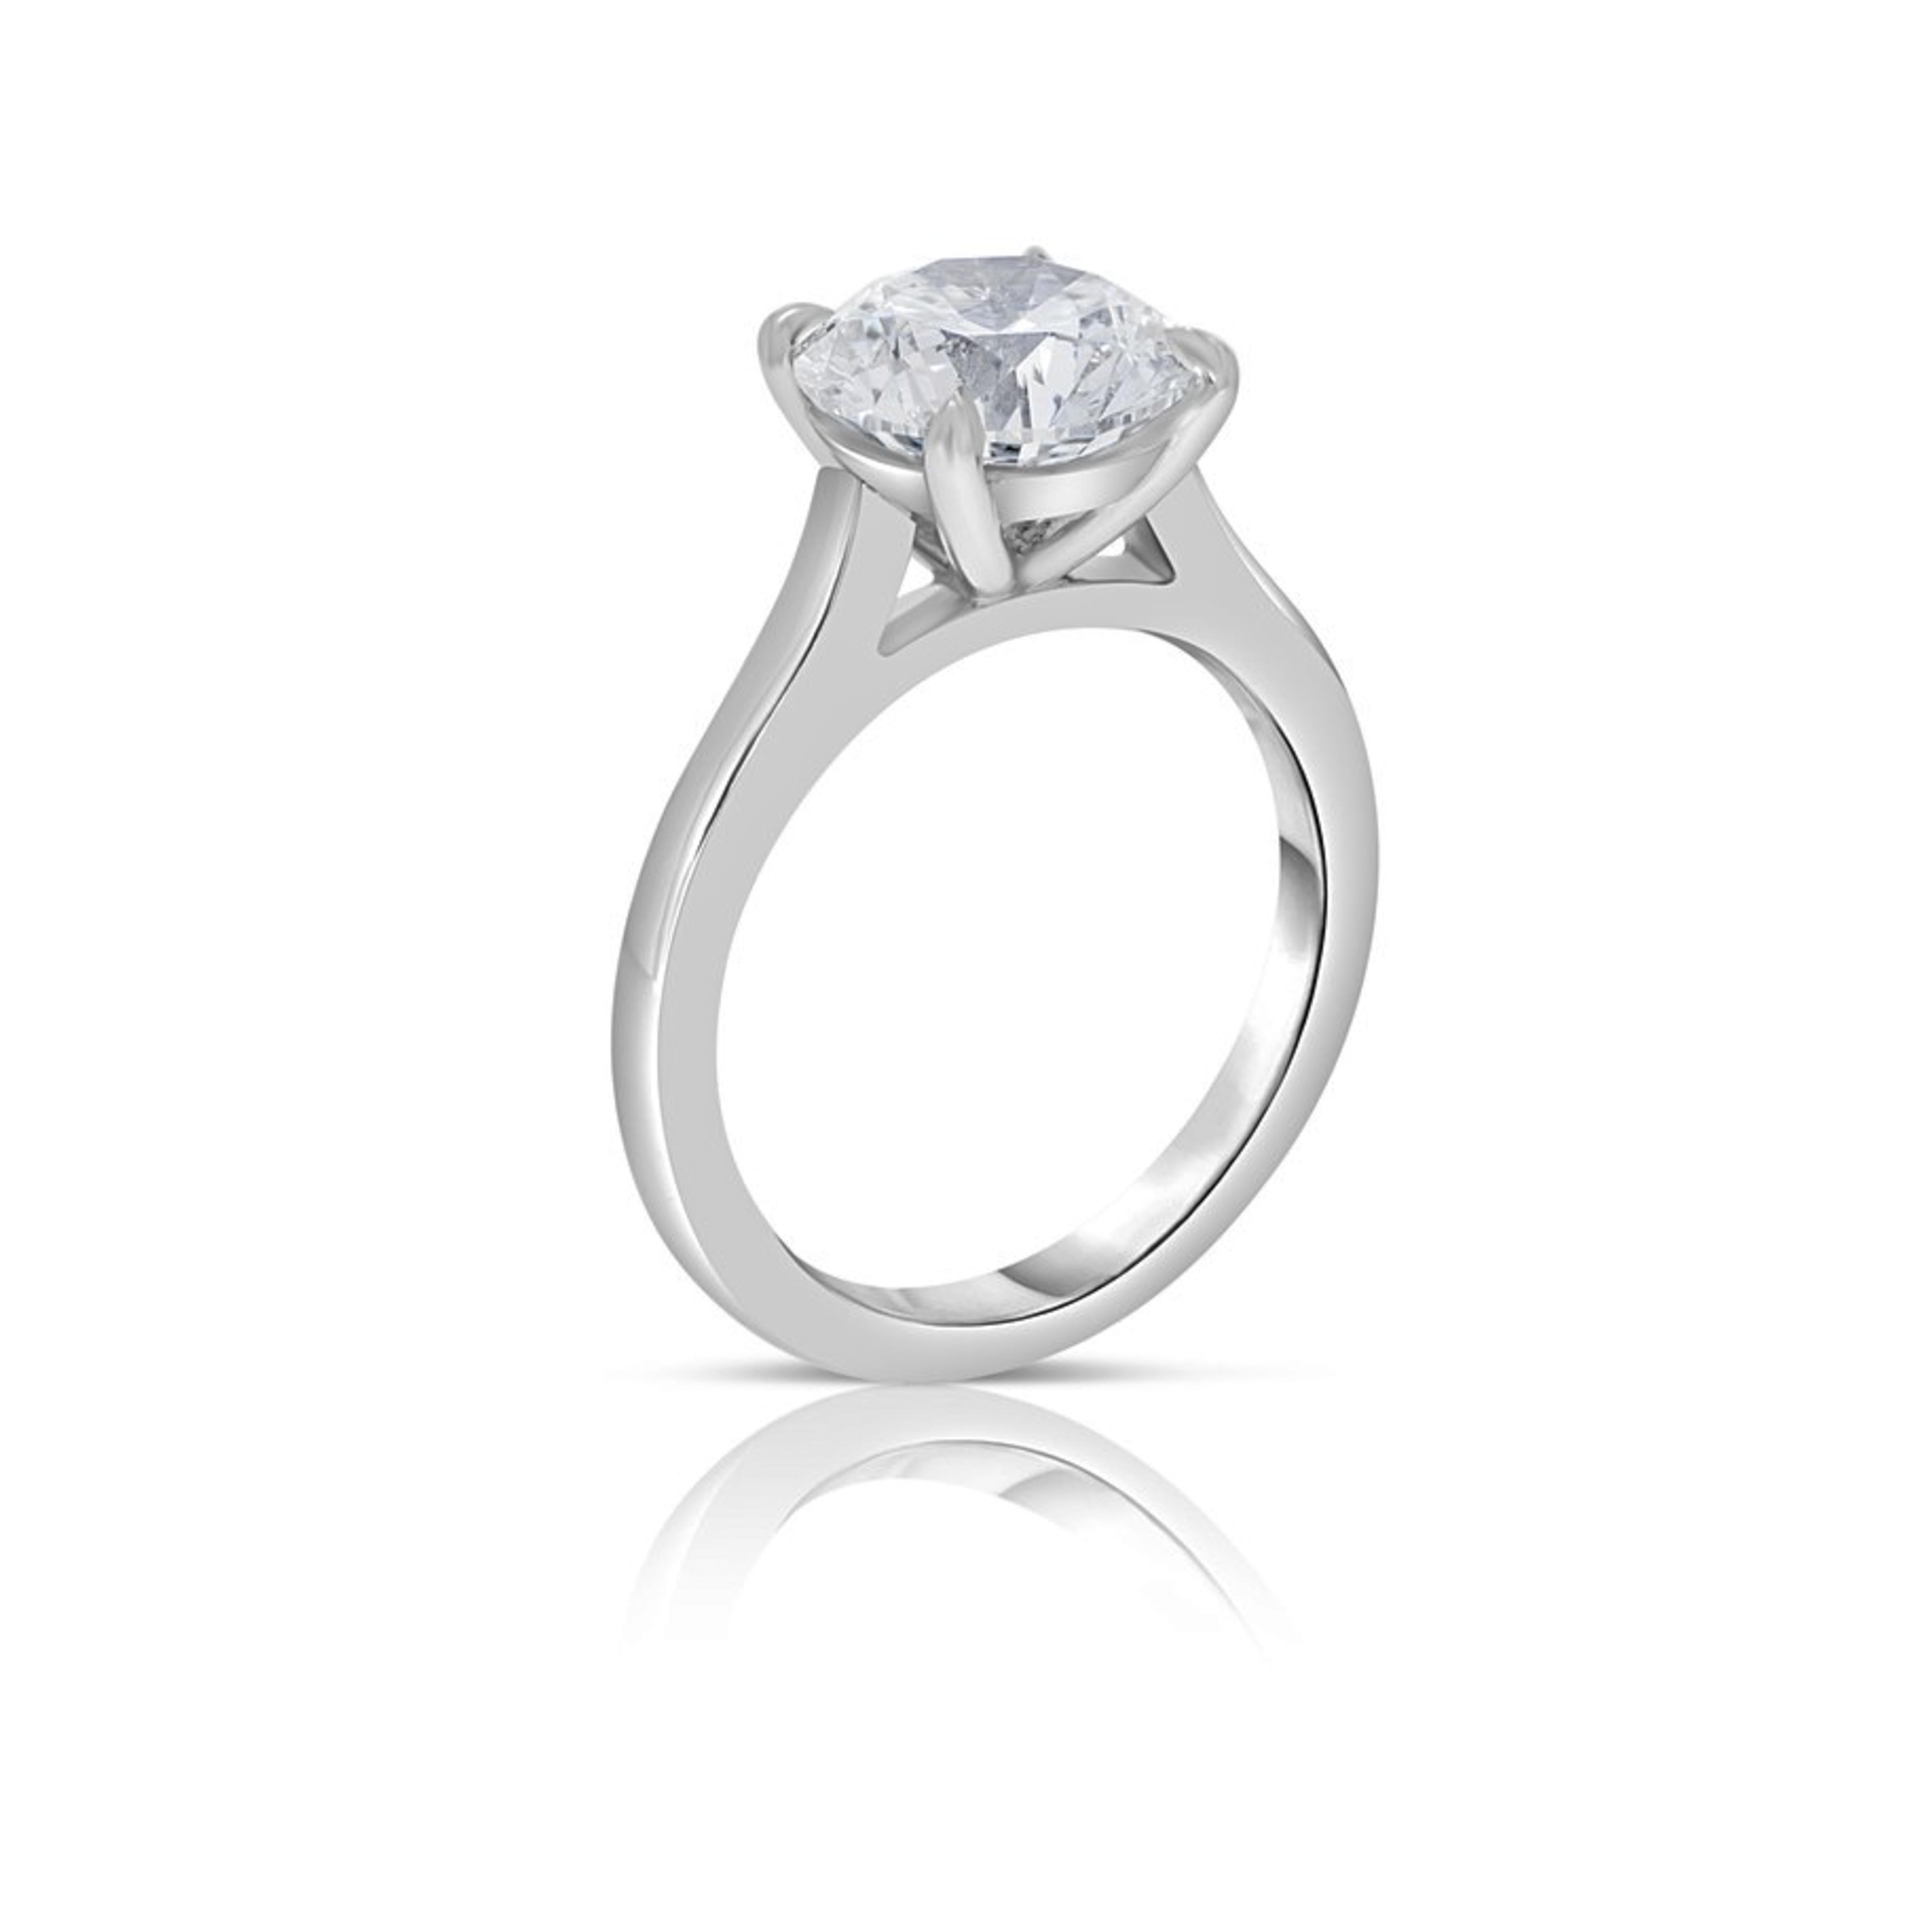 Classic Solitaire Round Brilliant cut Diamond Engagement Ring.
Centering is a GIA certified 3.19 carat, I color, SI1 clarity, set in Platinum
Finger size: 6.5 